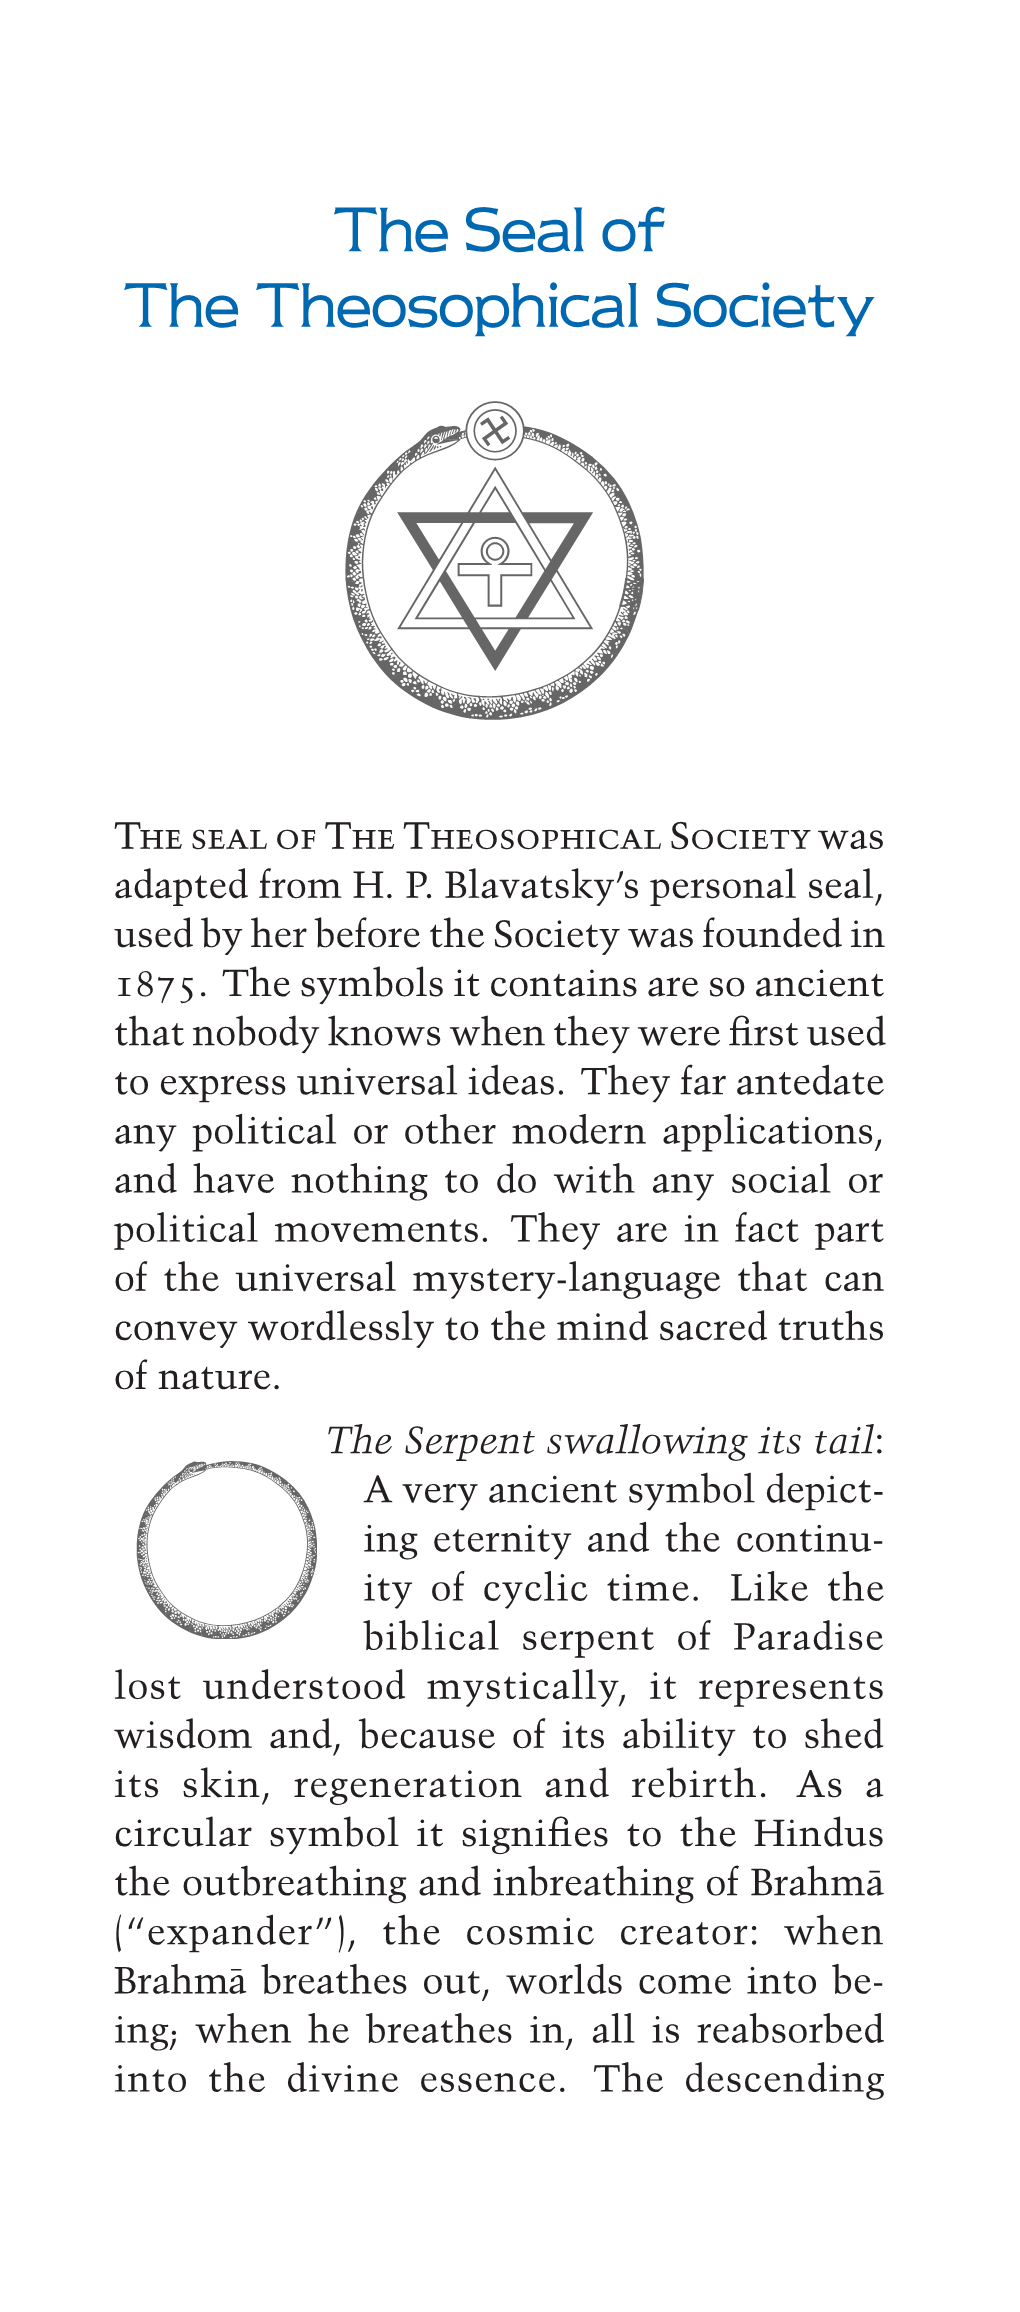 The Seal of the Theosophical Society